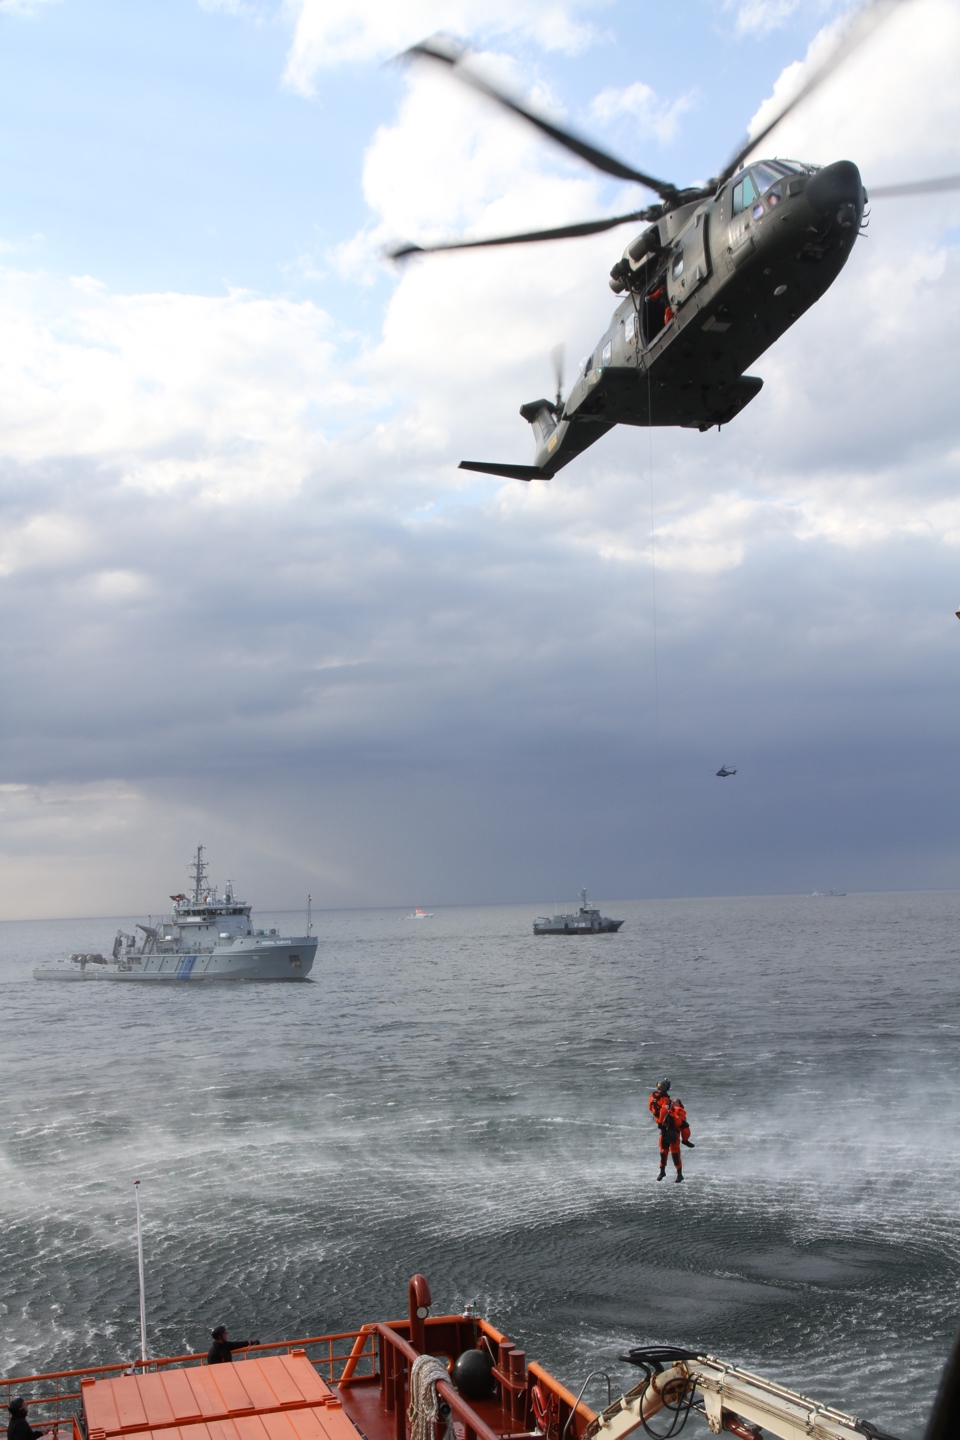 Search and rescue rehearsal at sea.